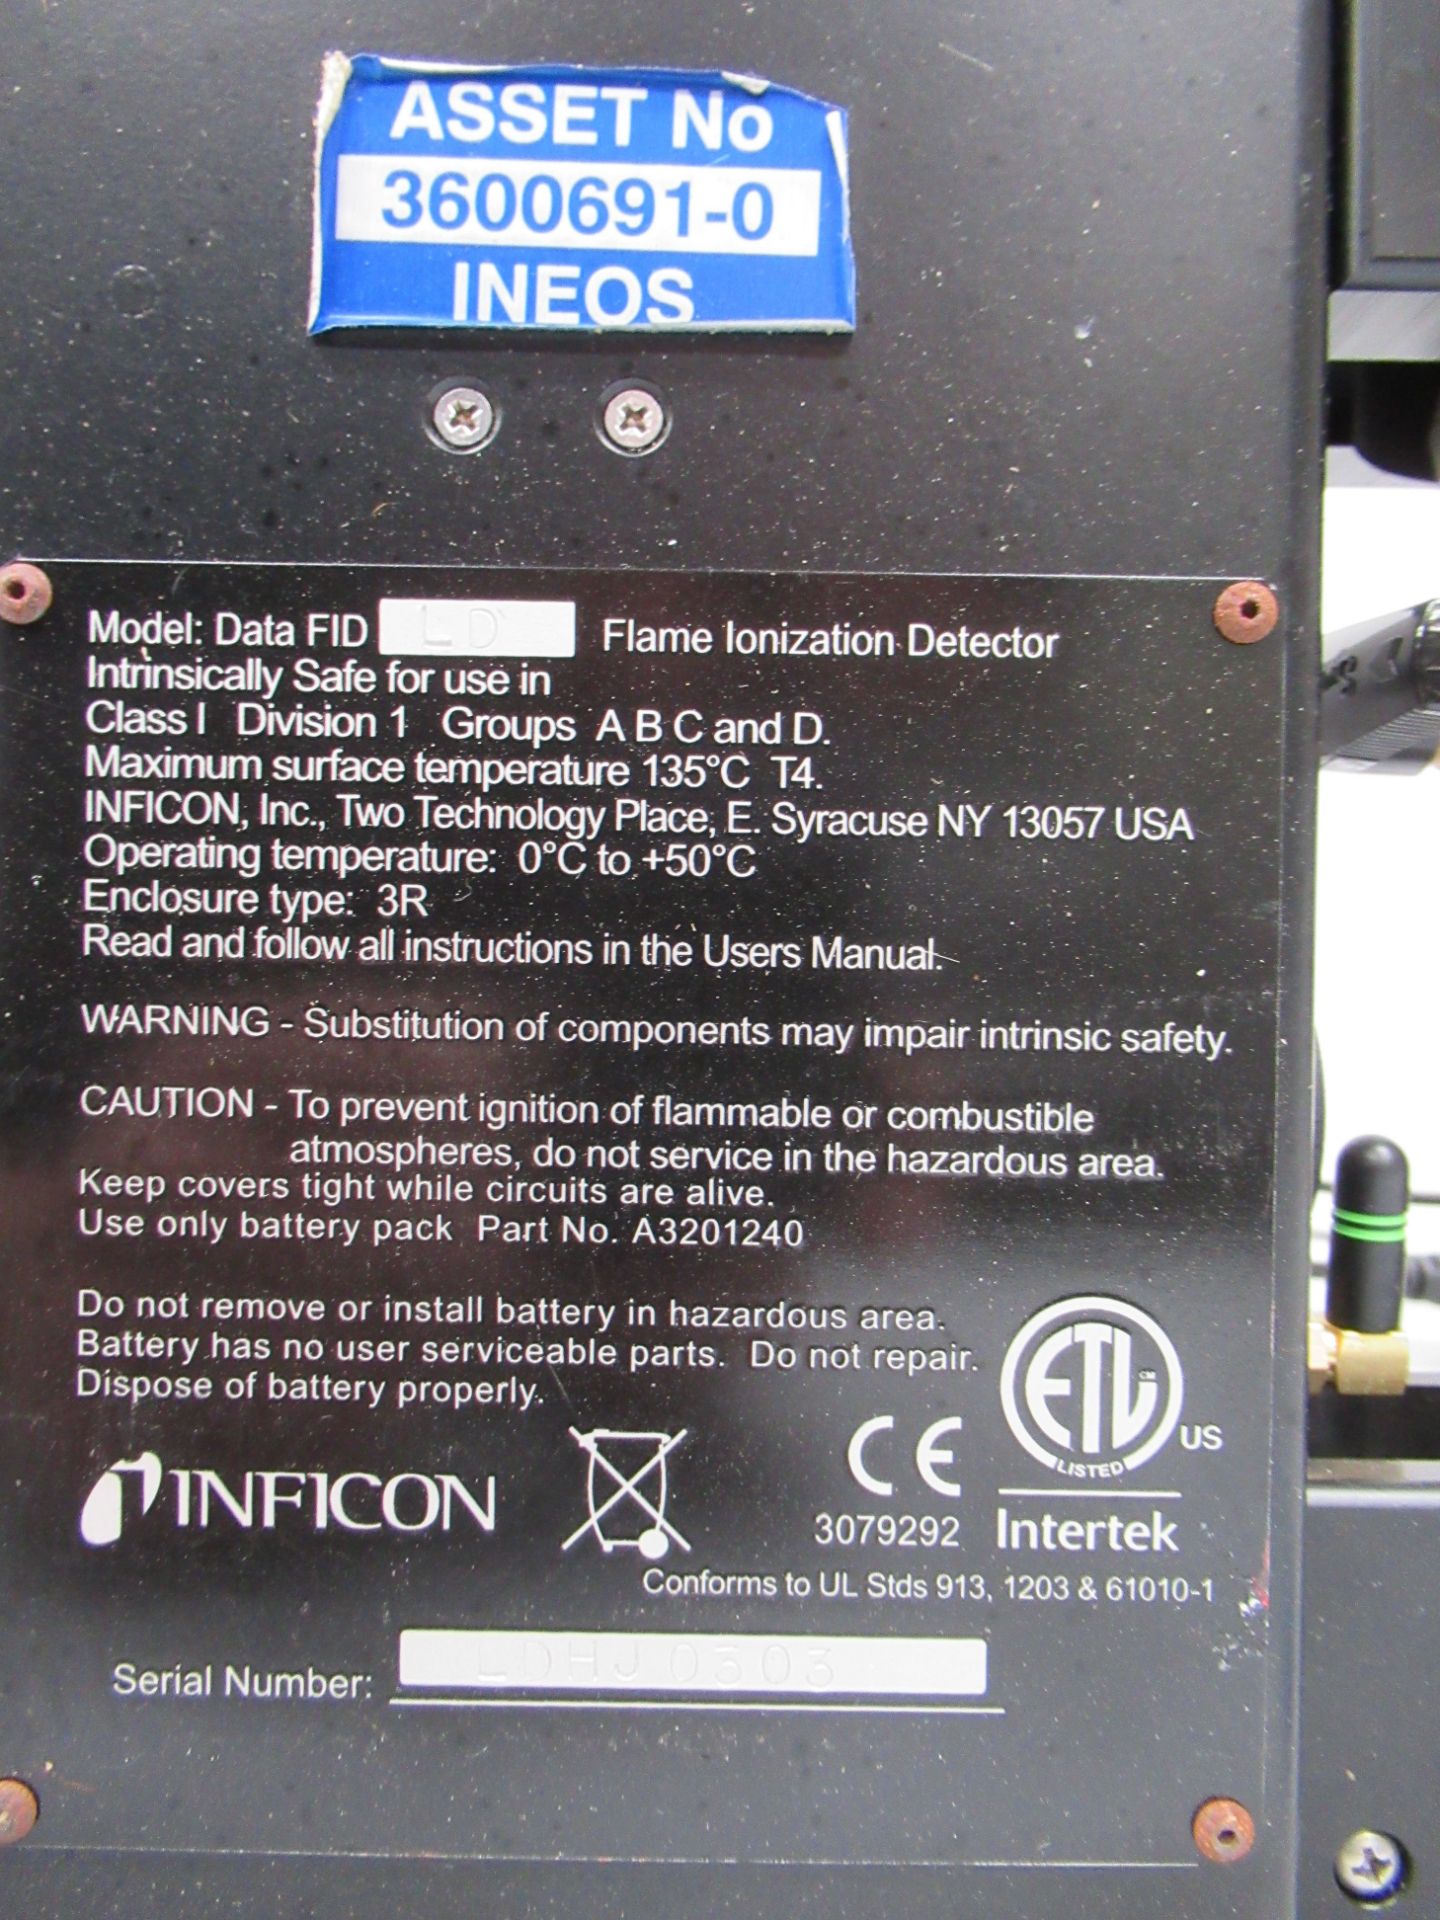 Inficon DataFID Portable Flame Ionization Detector - Image 6 of 6